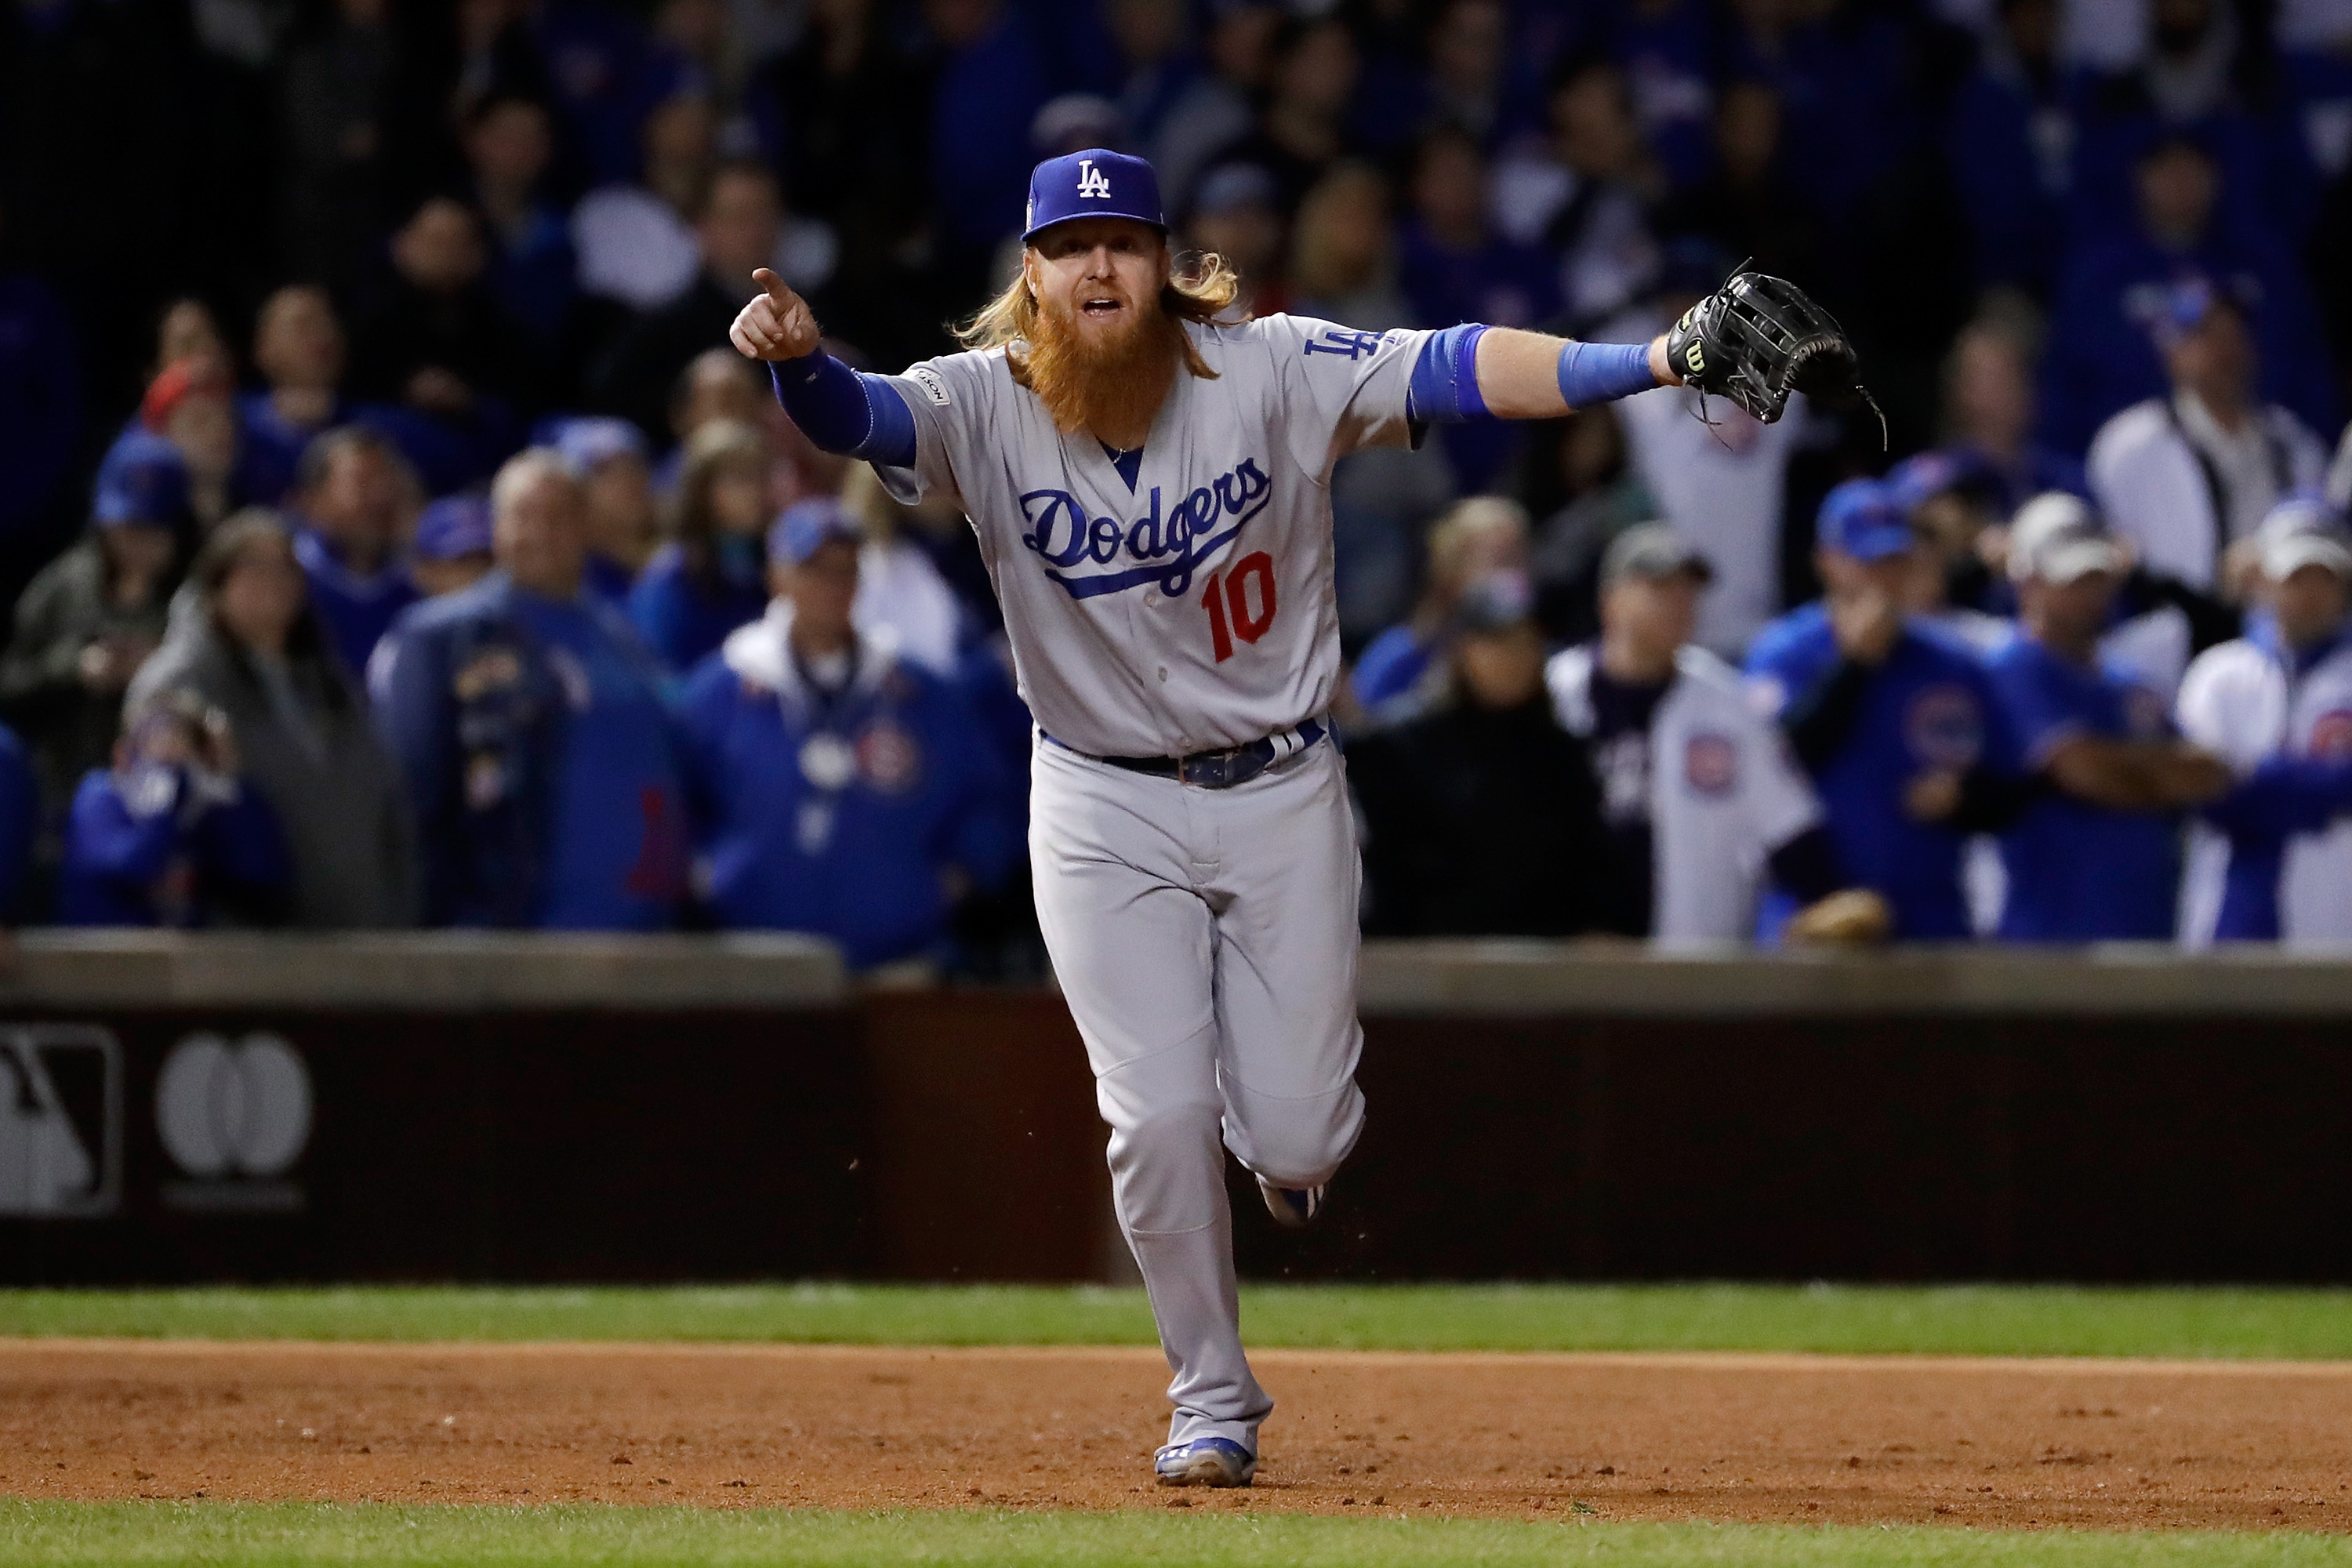 So Just How Good Is This Dodgers Lineup? - by Molly Knight